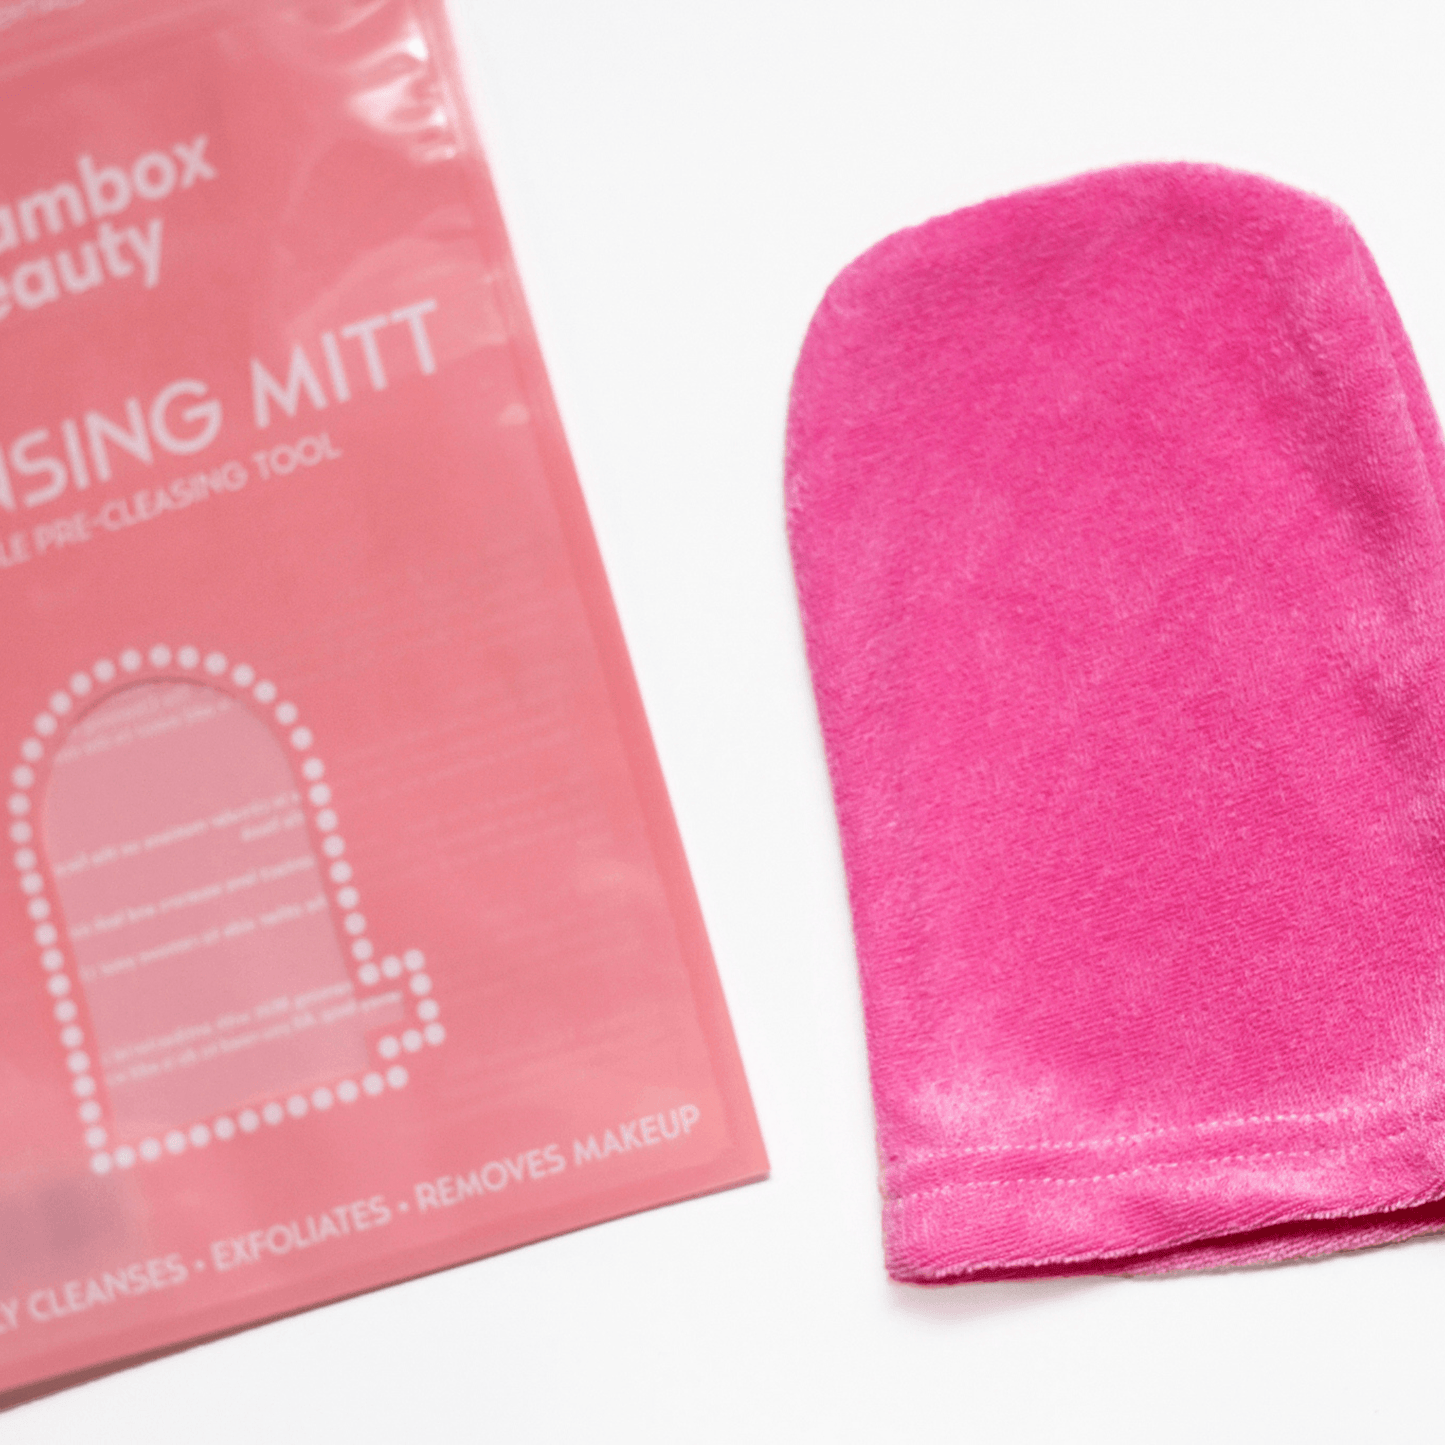 Cleansing Mitt [Double Cleansing Tool] - Dreambox Beauty